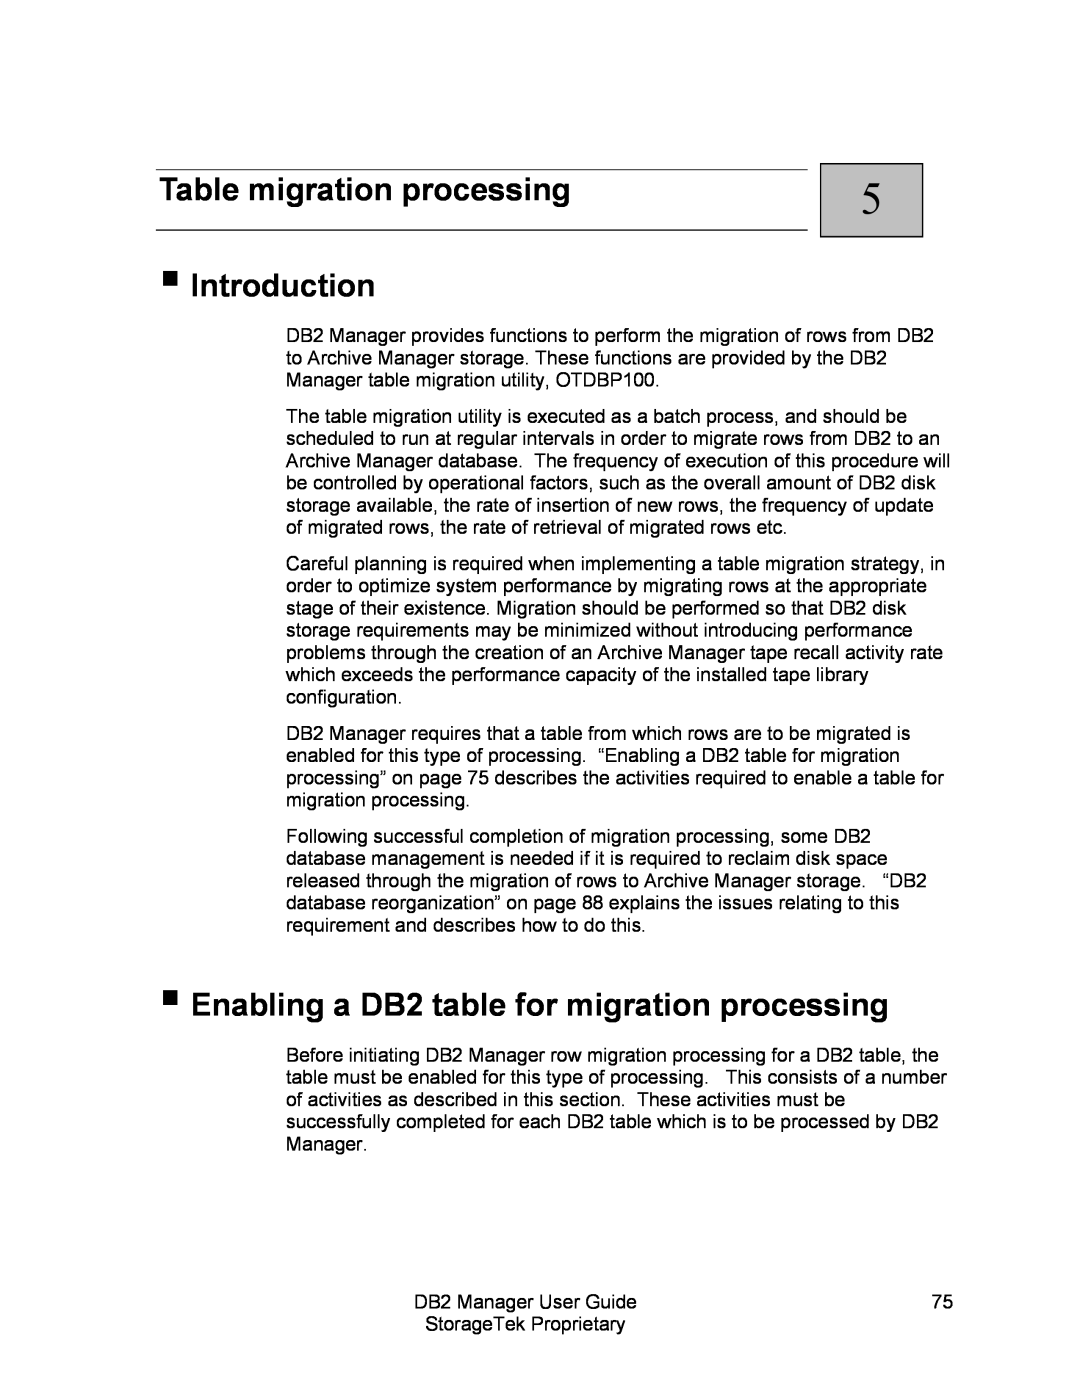 StorageTek 312564001 manual Table migration processing Introduction, Enabling a DB2 table for migration processing 